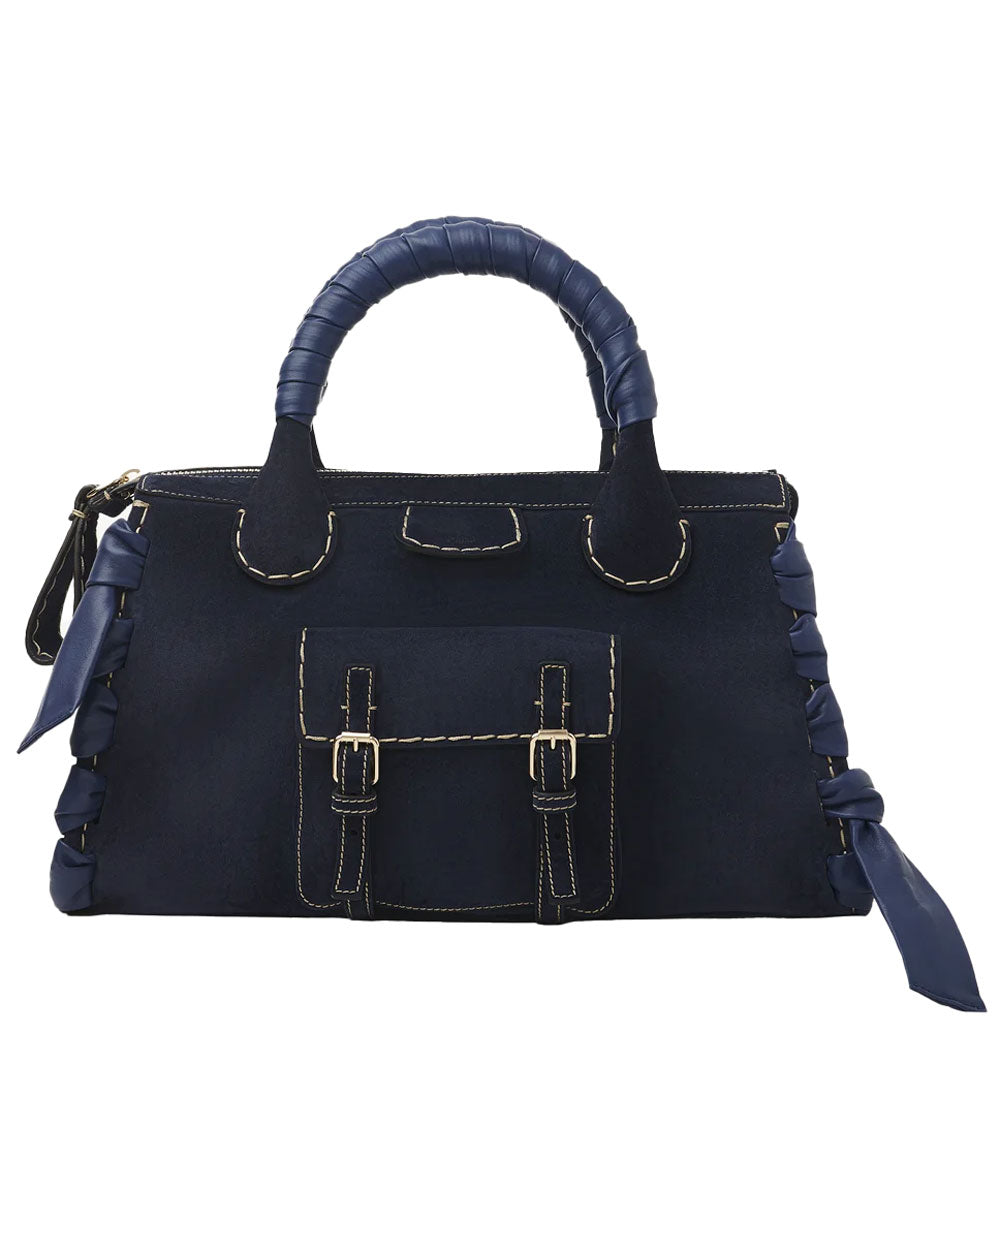 Edith Day Bag in Navy